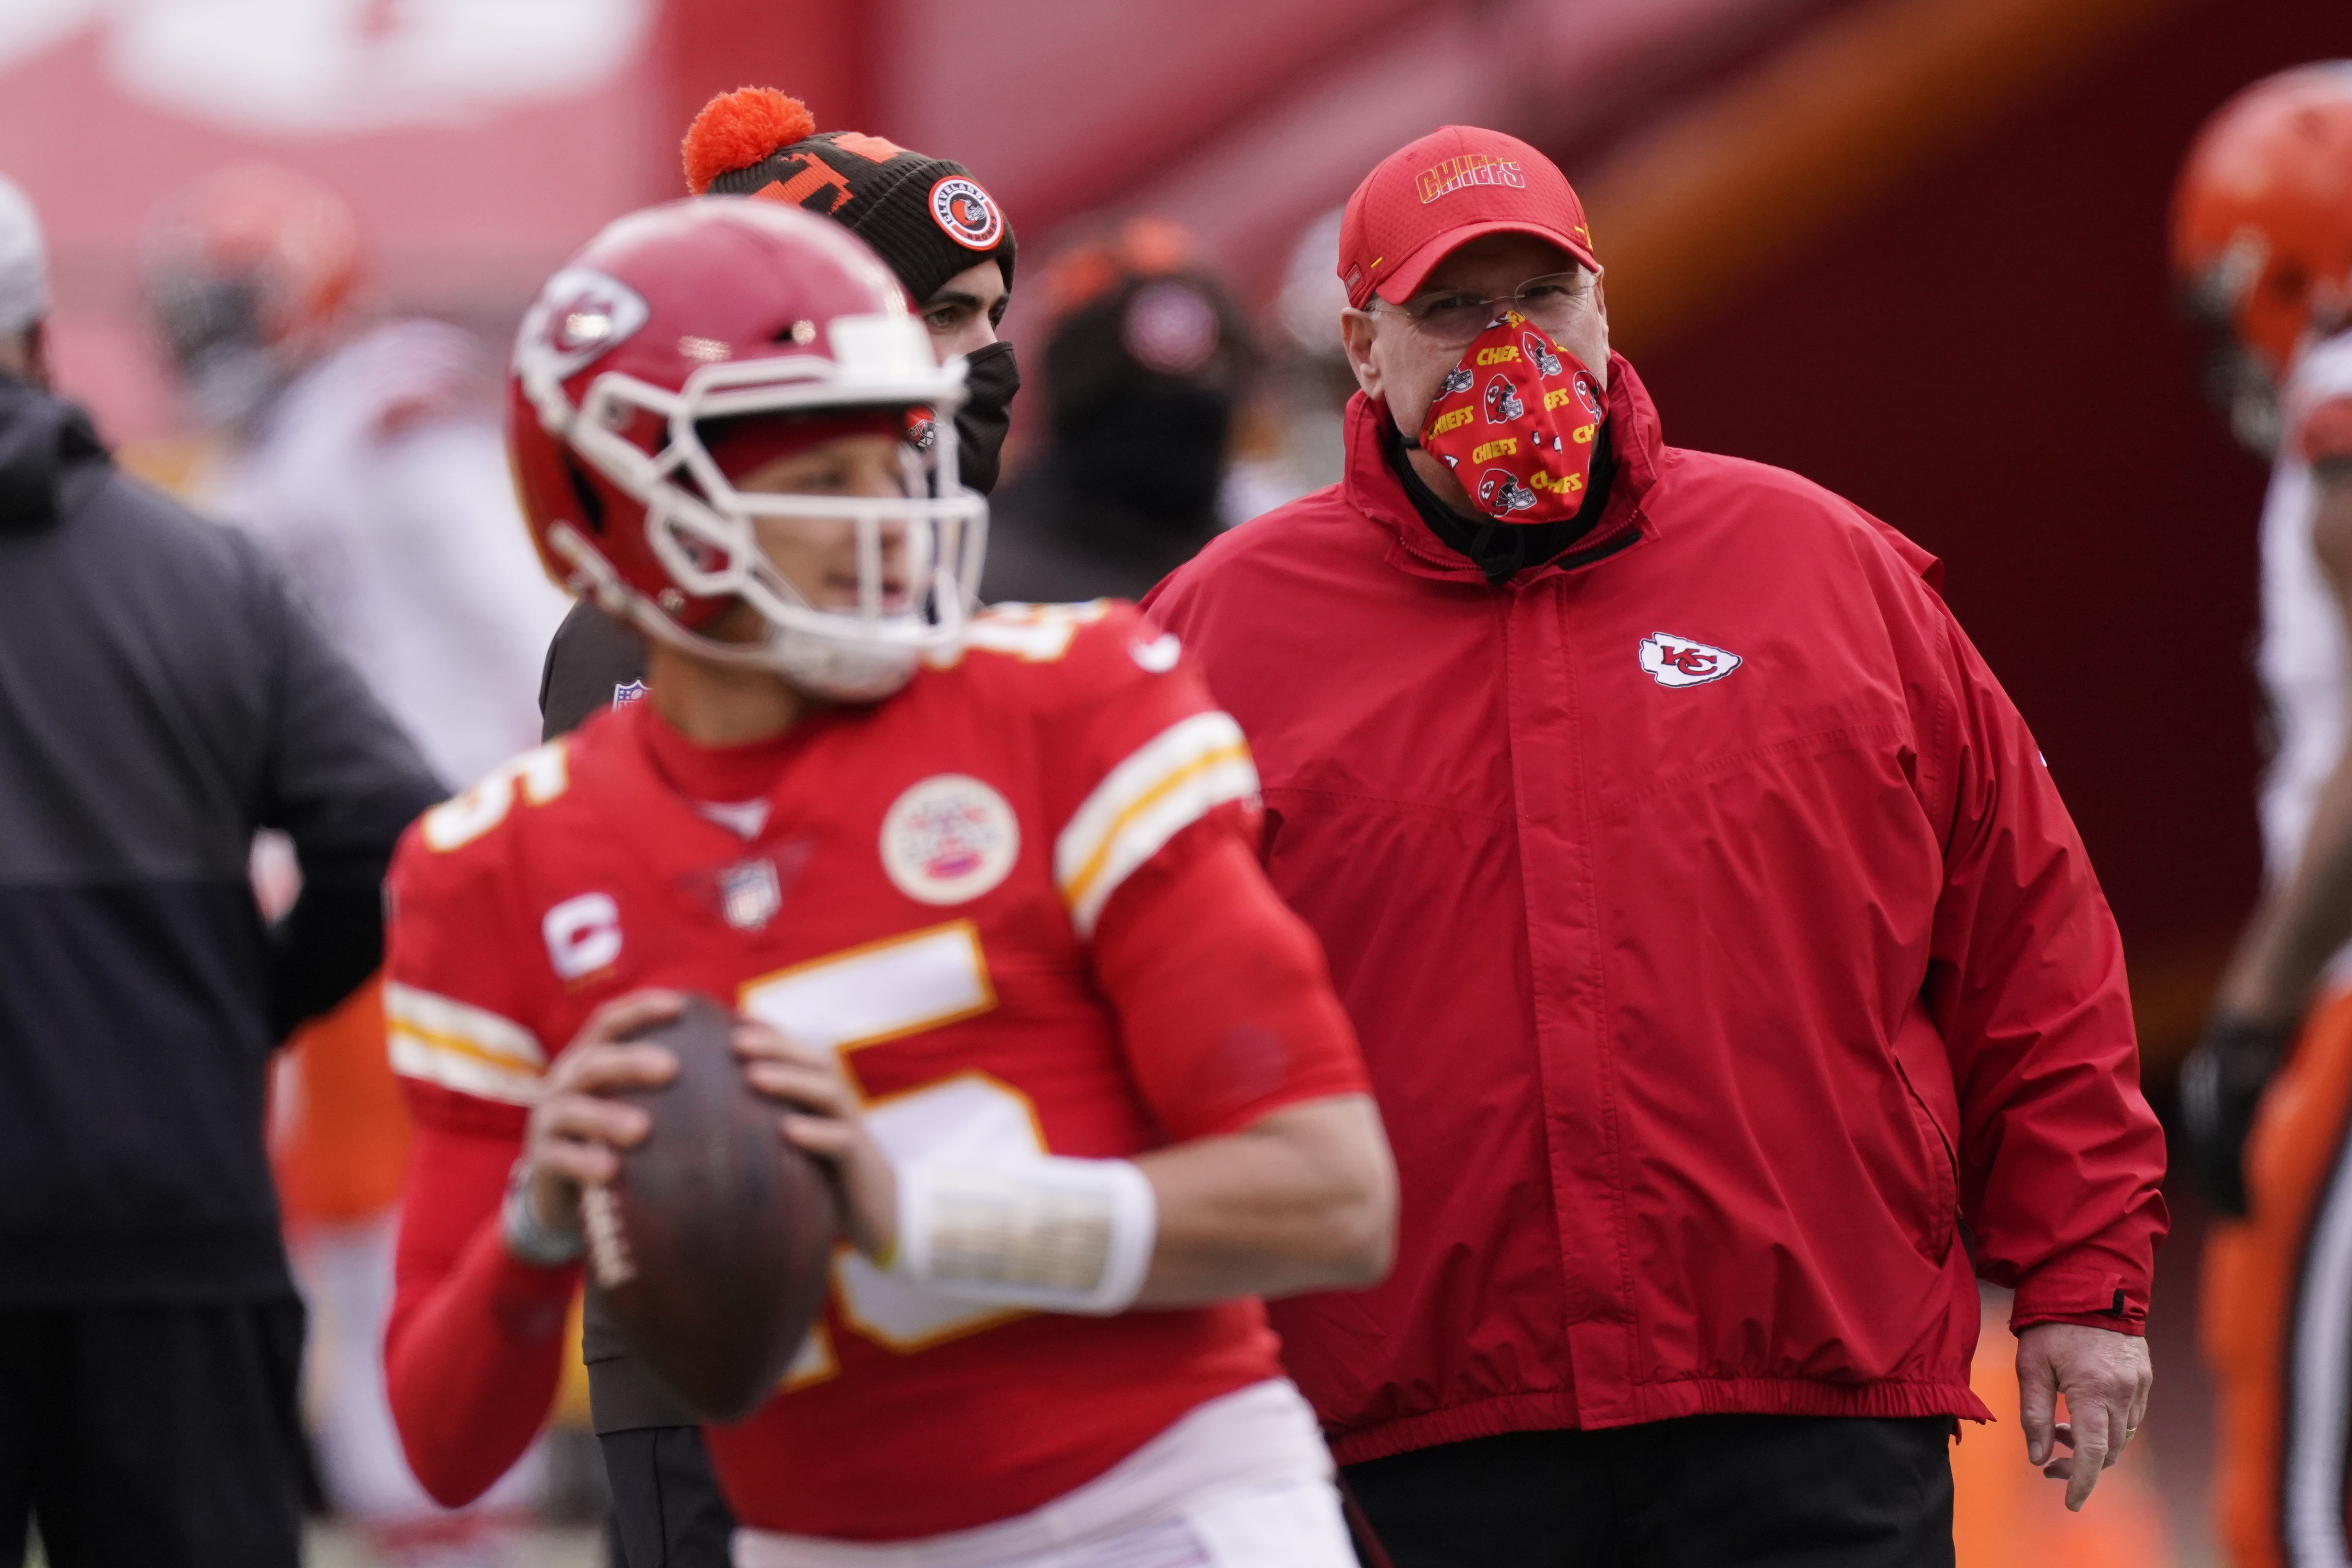 How to Watch Cleveland Browns at Kansas City Chiefs on January 17